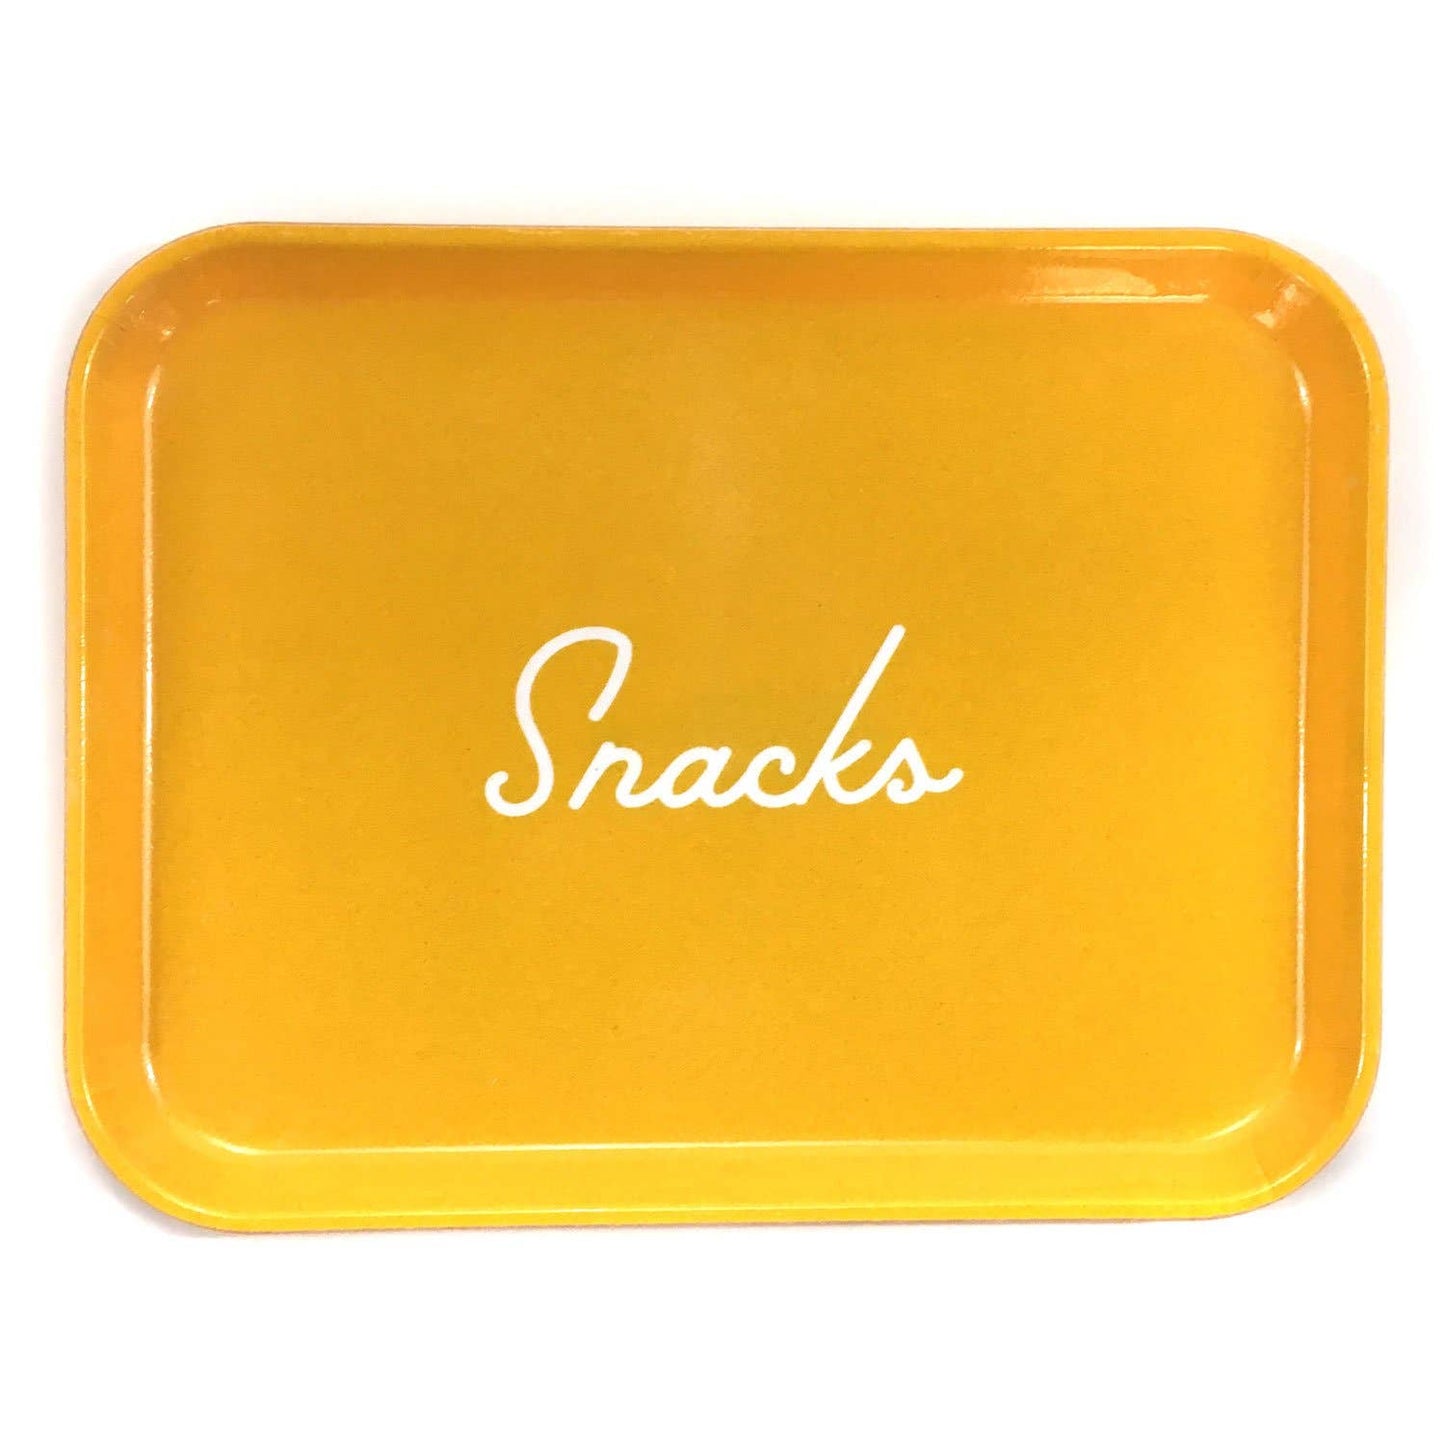 Large fiberglass snack tray in mustard yellow with white script "Snacks"